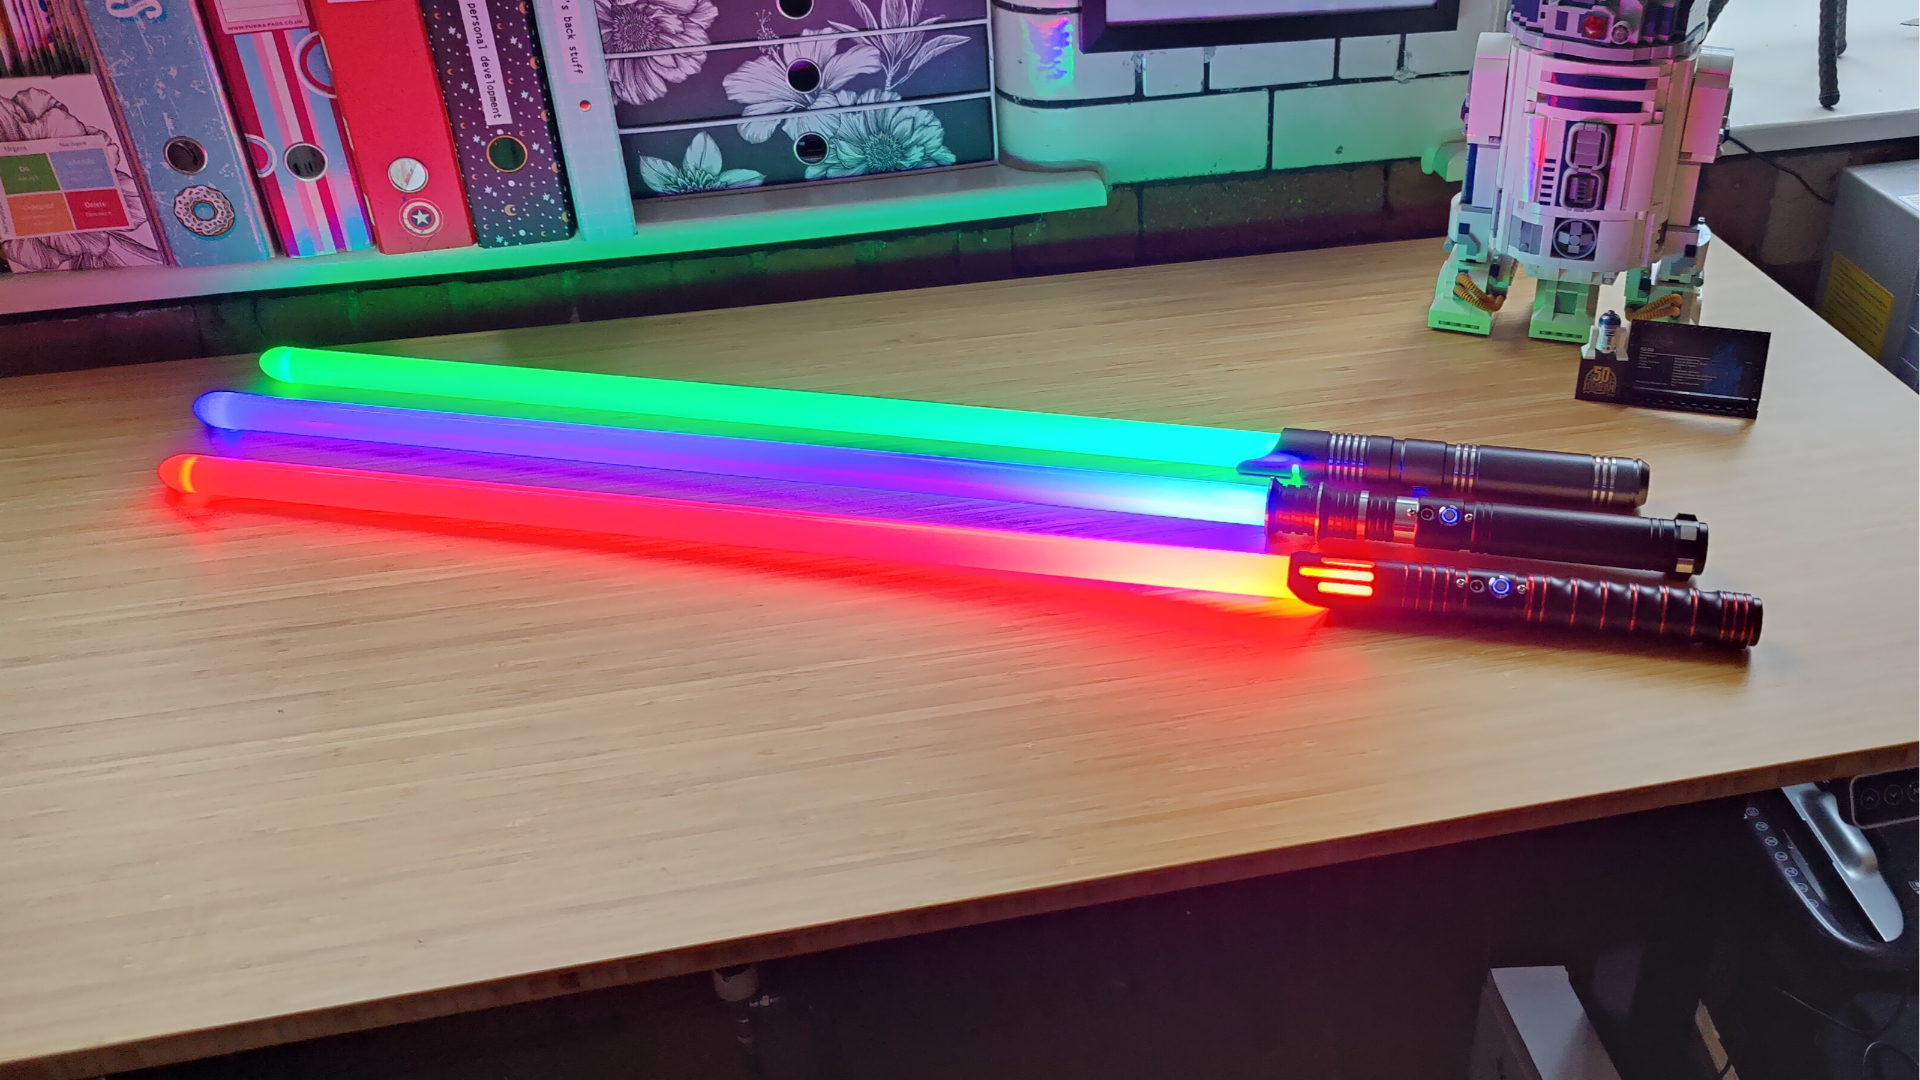 Encalife lightsabers switched on showing red, blue, and green blades.